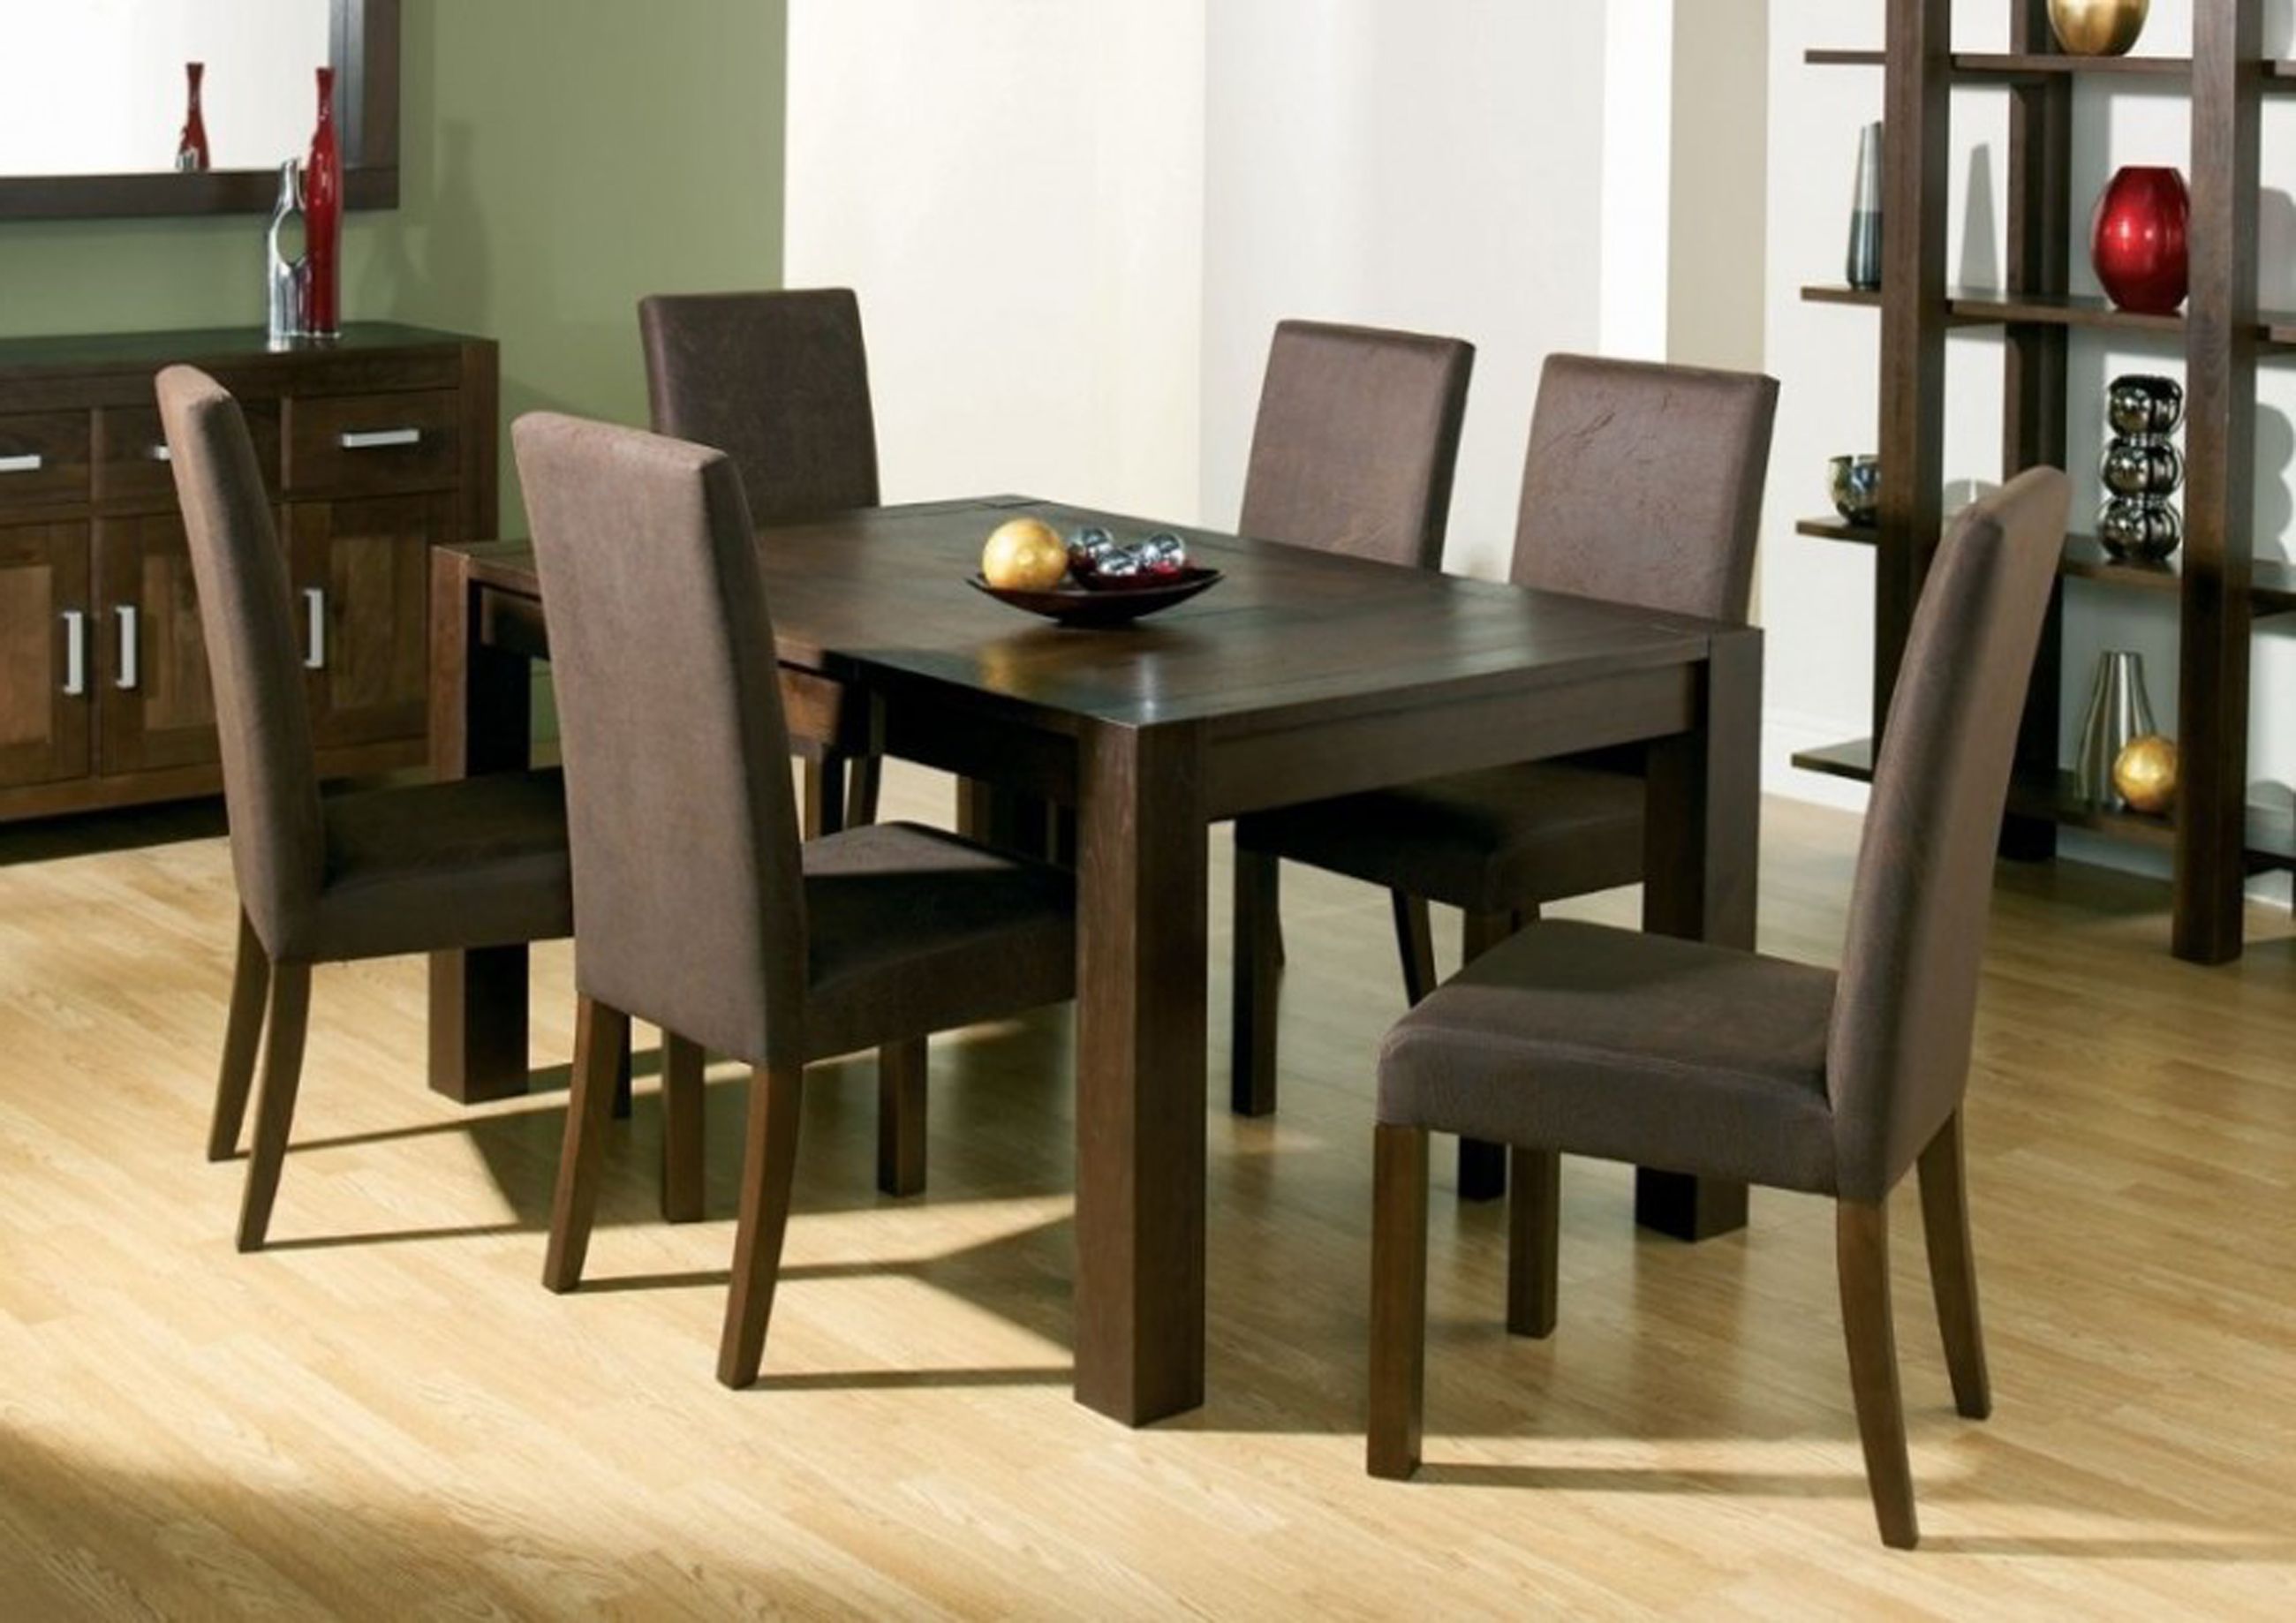 Modern Dining Room Decoration Chairs With Charming Tone (View 5 of 28)